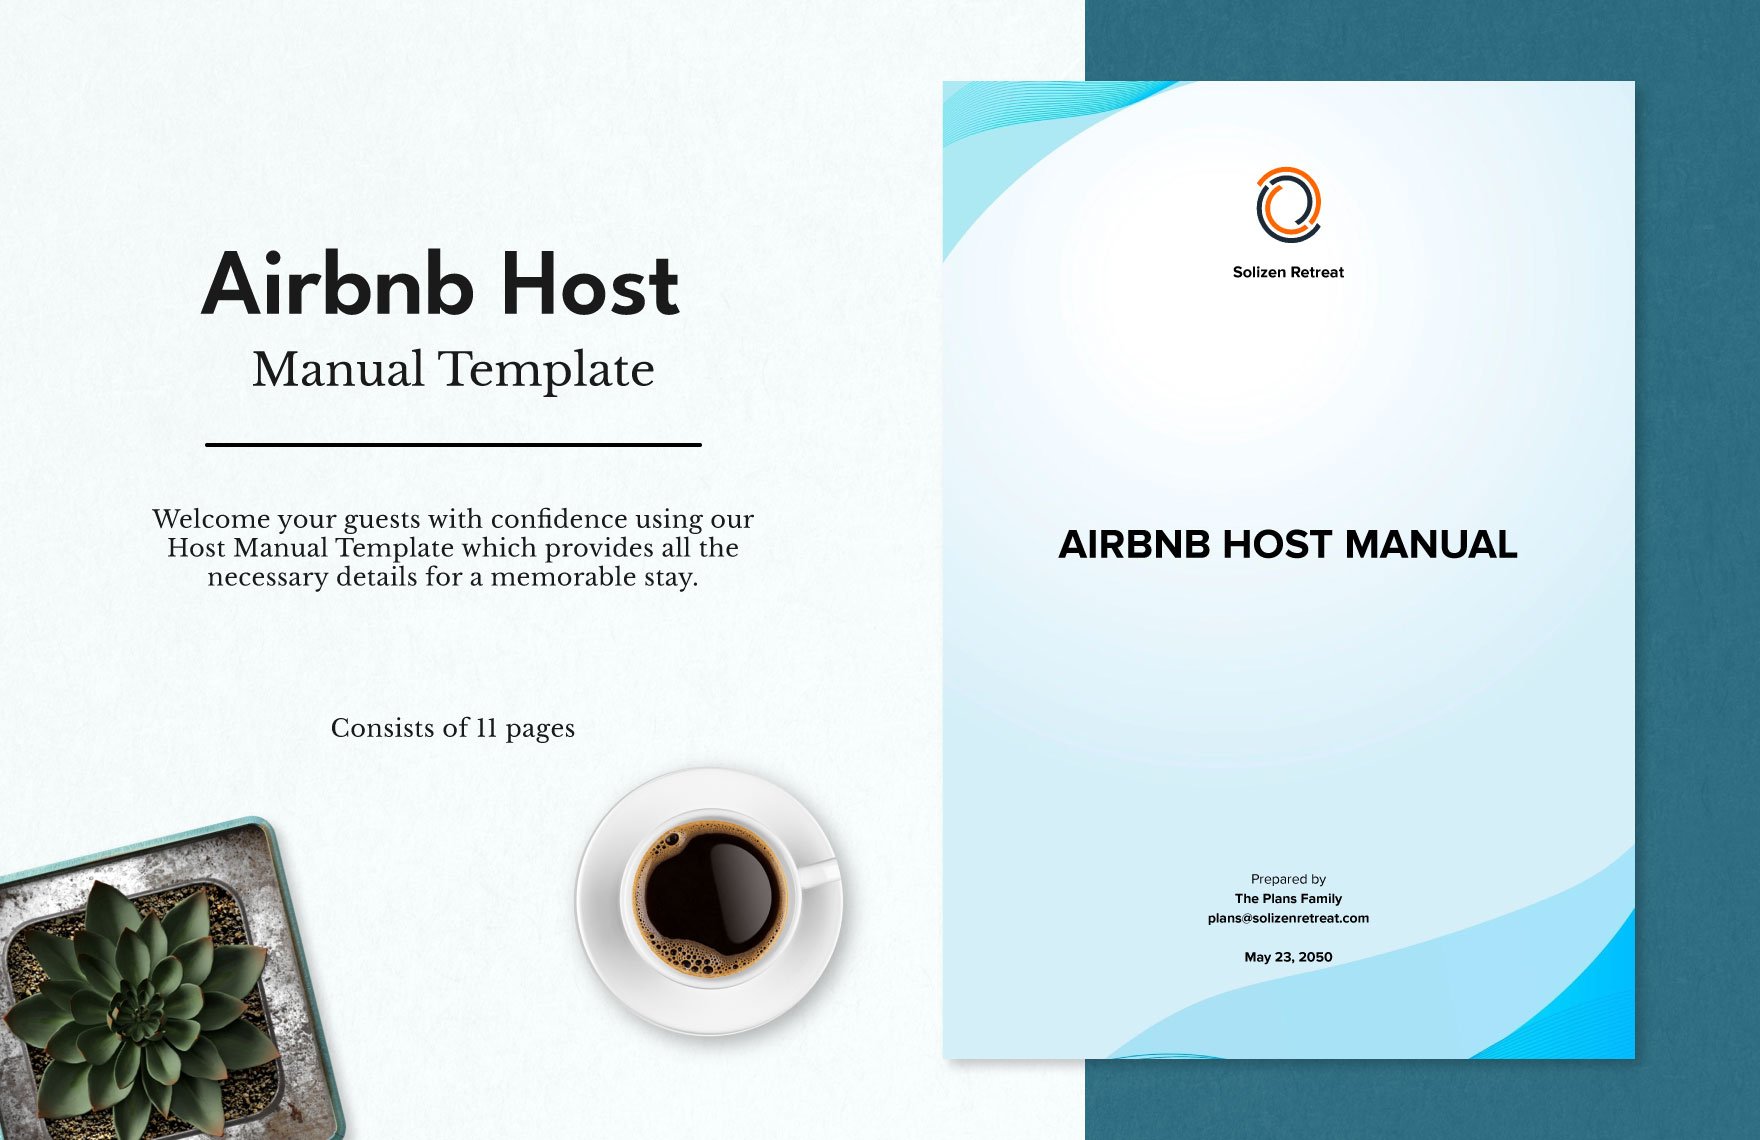 Airbnb Host Manual Template